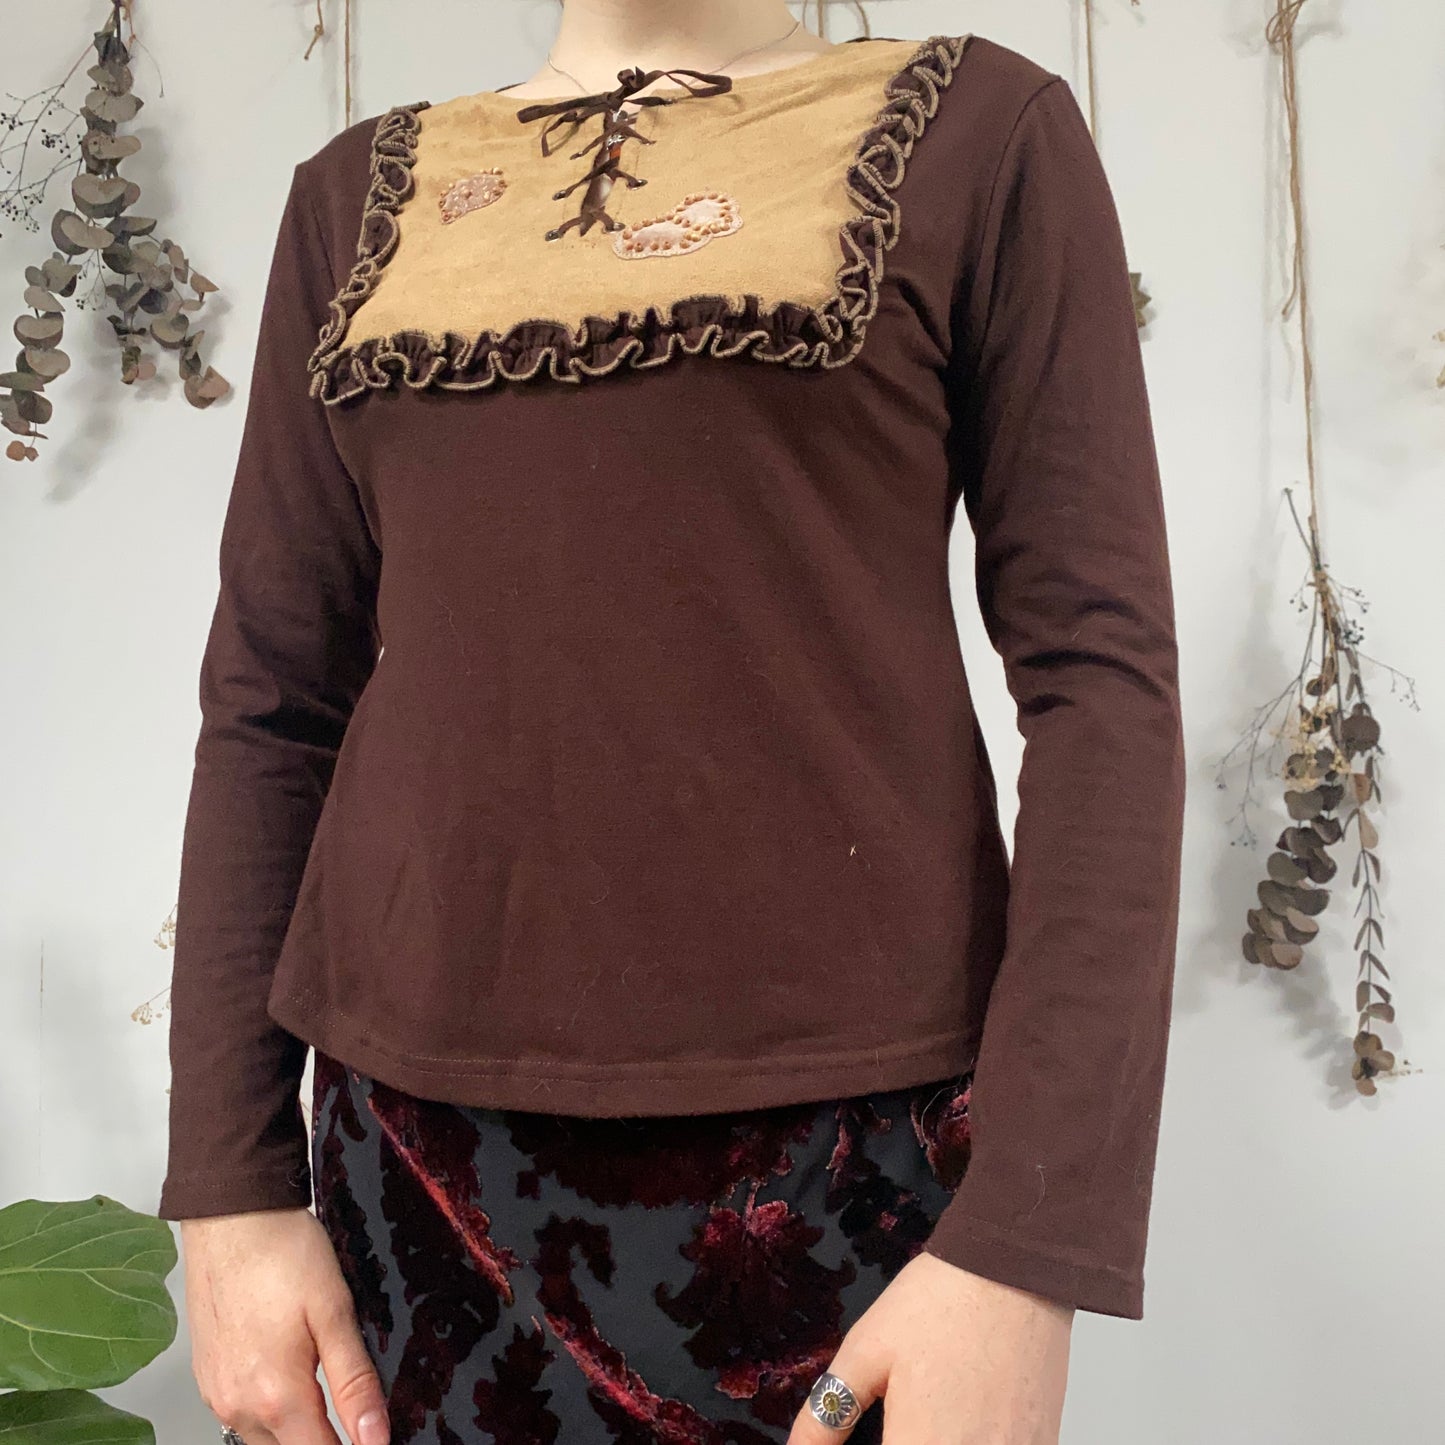 Brown long sleeve top - size M